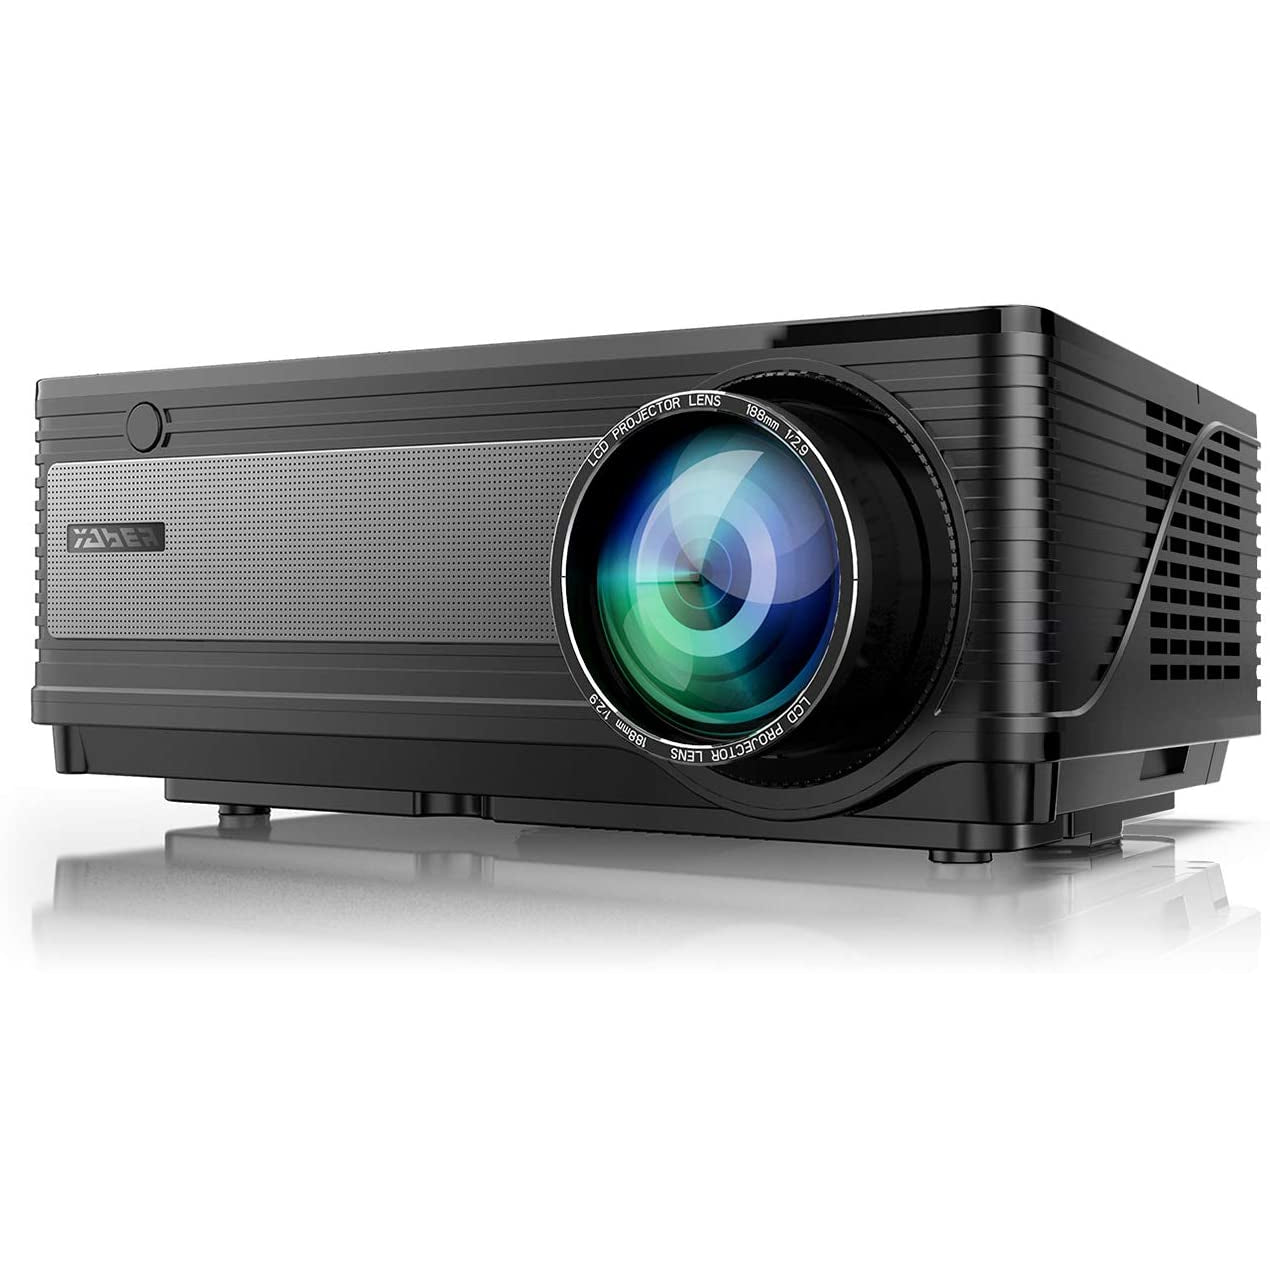 Yaber Video Projector Y21 Home and Outdoor - Black